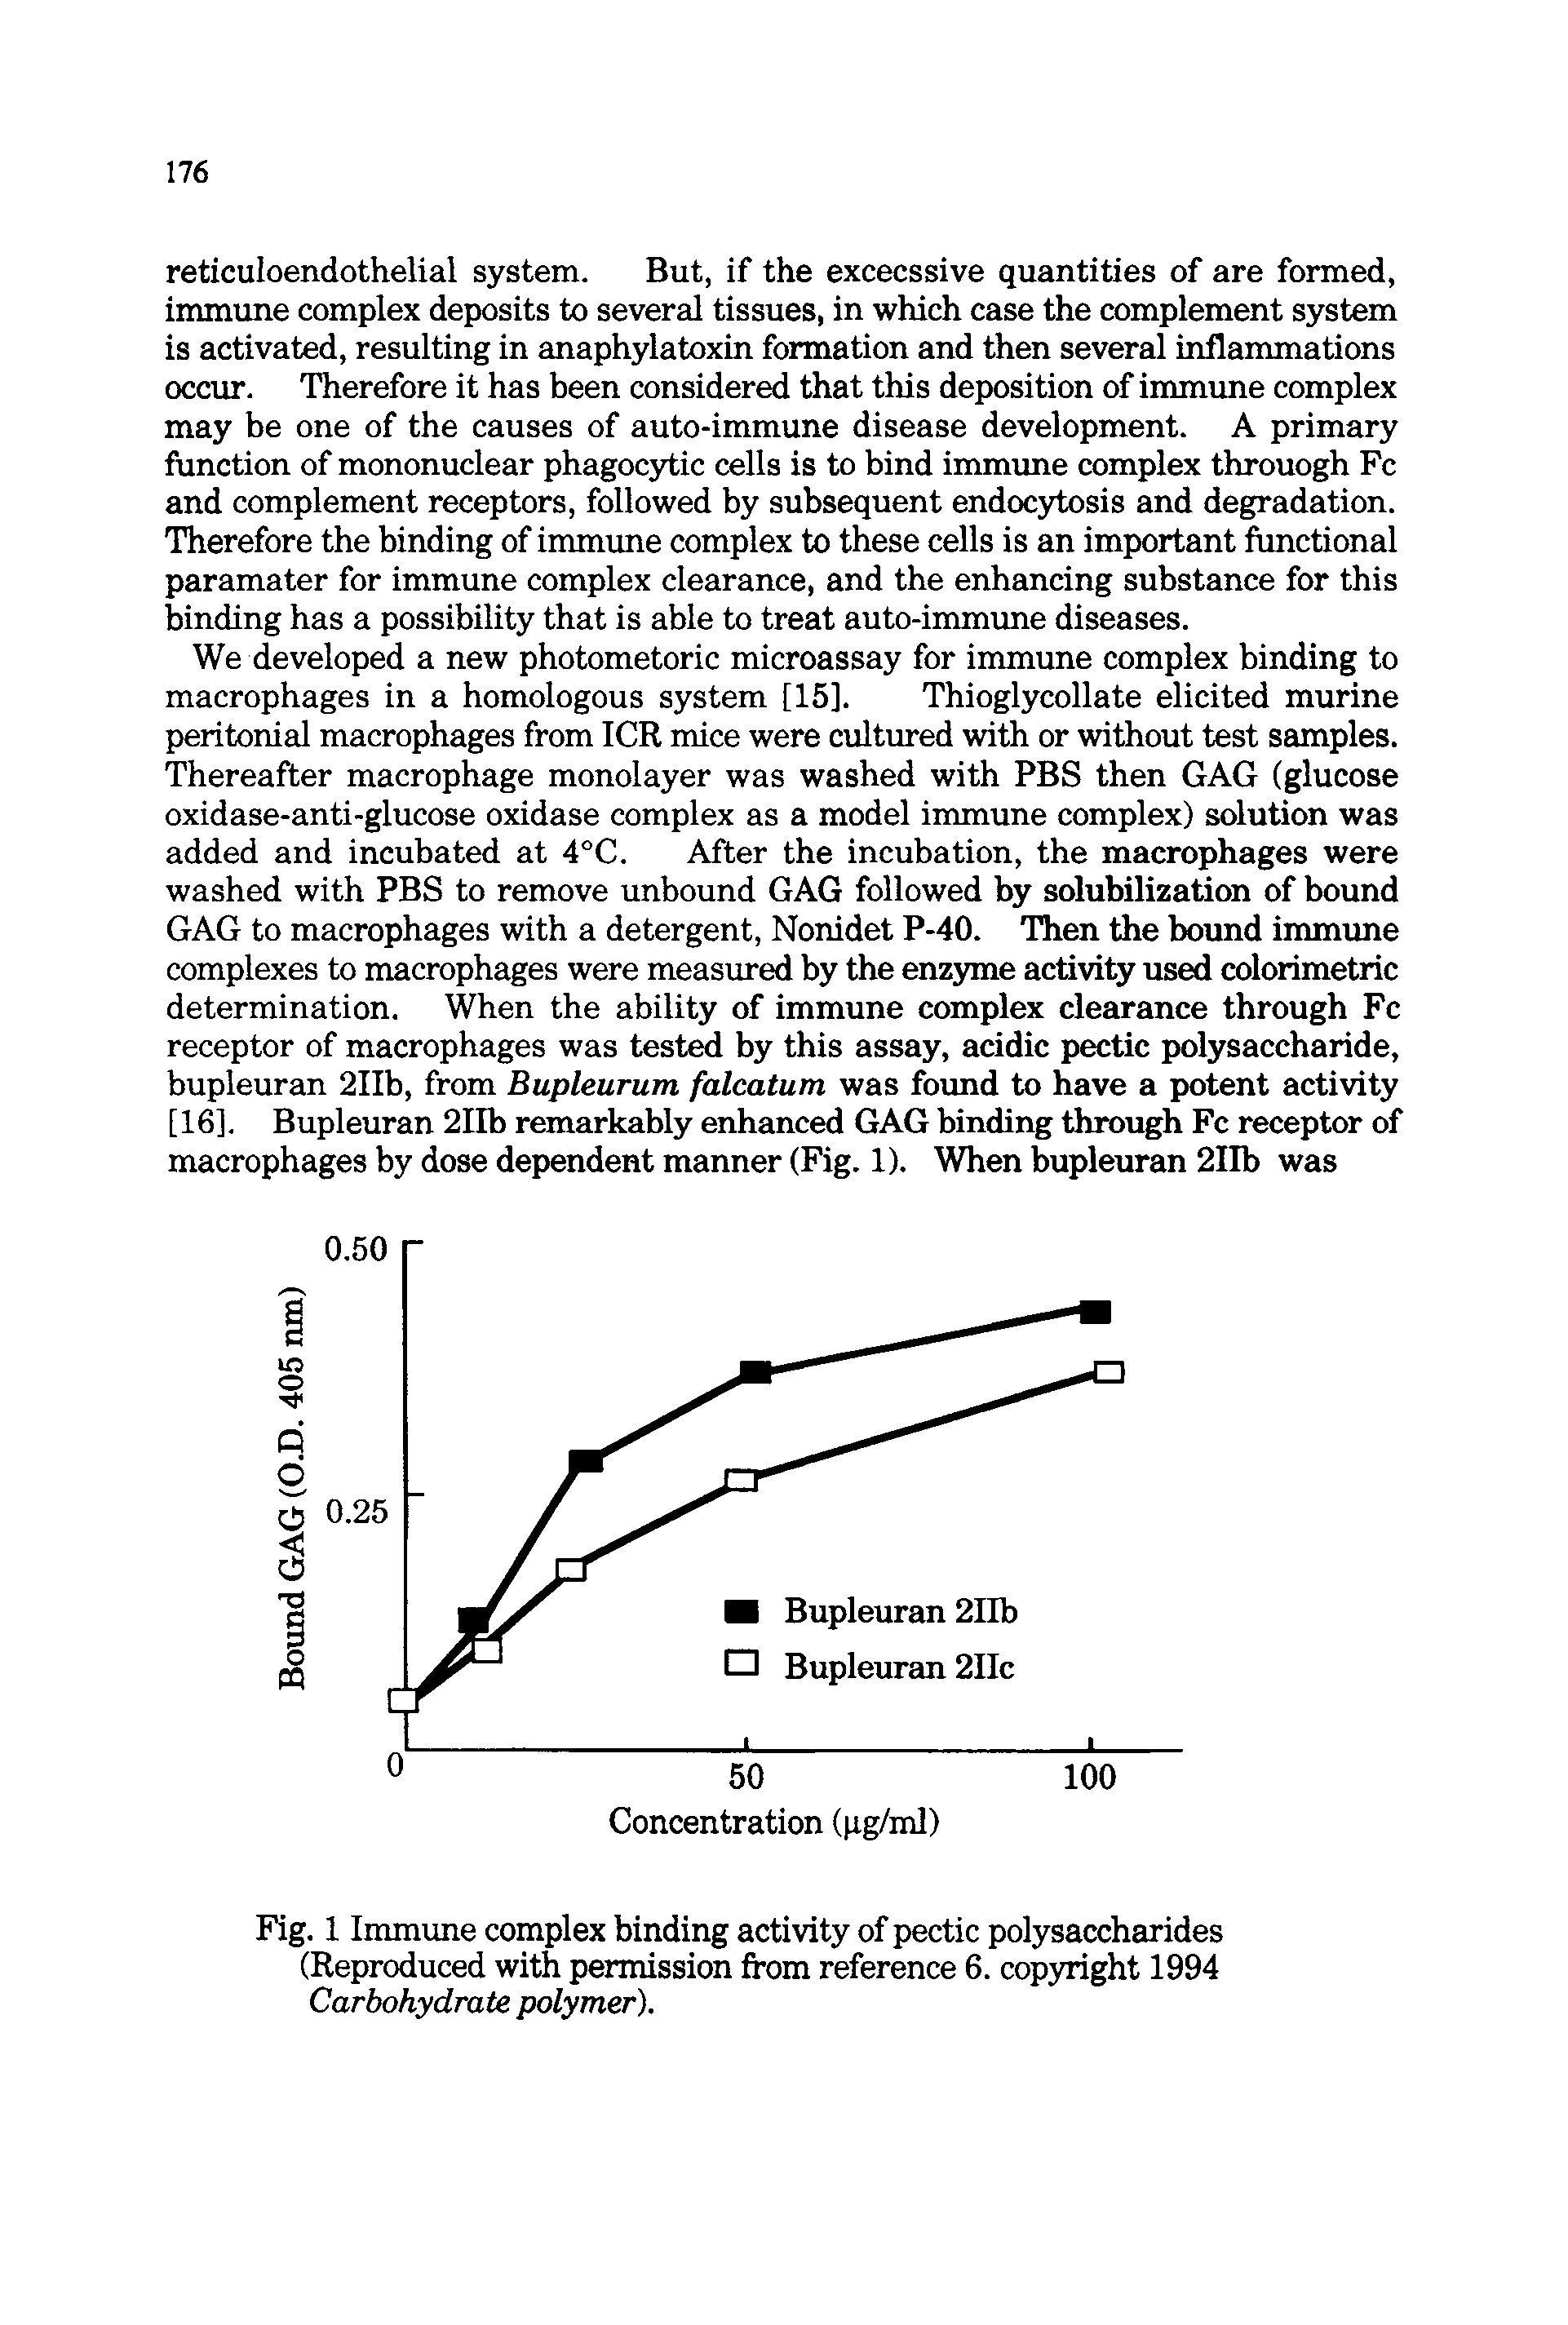 Fig. 1 Immune complex binding activity of pectic polysaccharides (Reproduced with permission from reference 6. copyright 1994 Carbohydrate polymer).